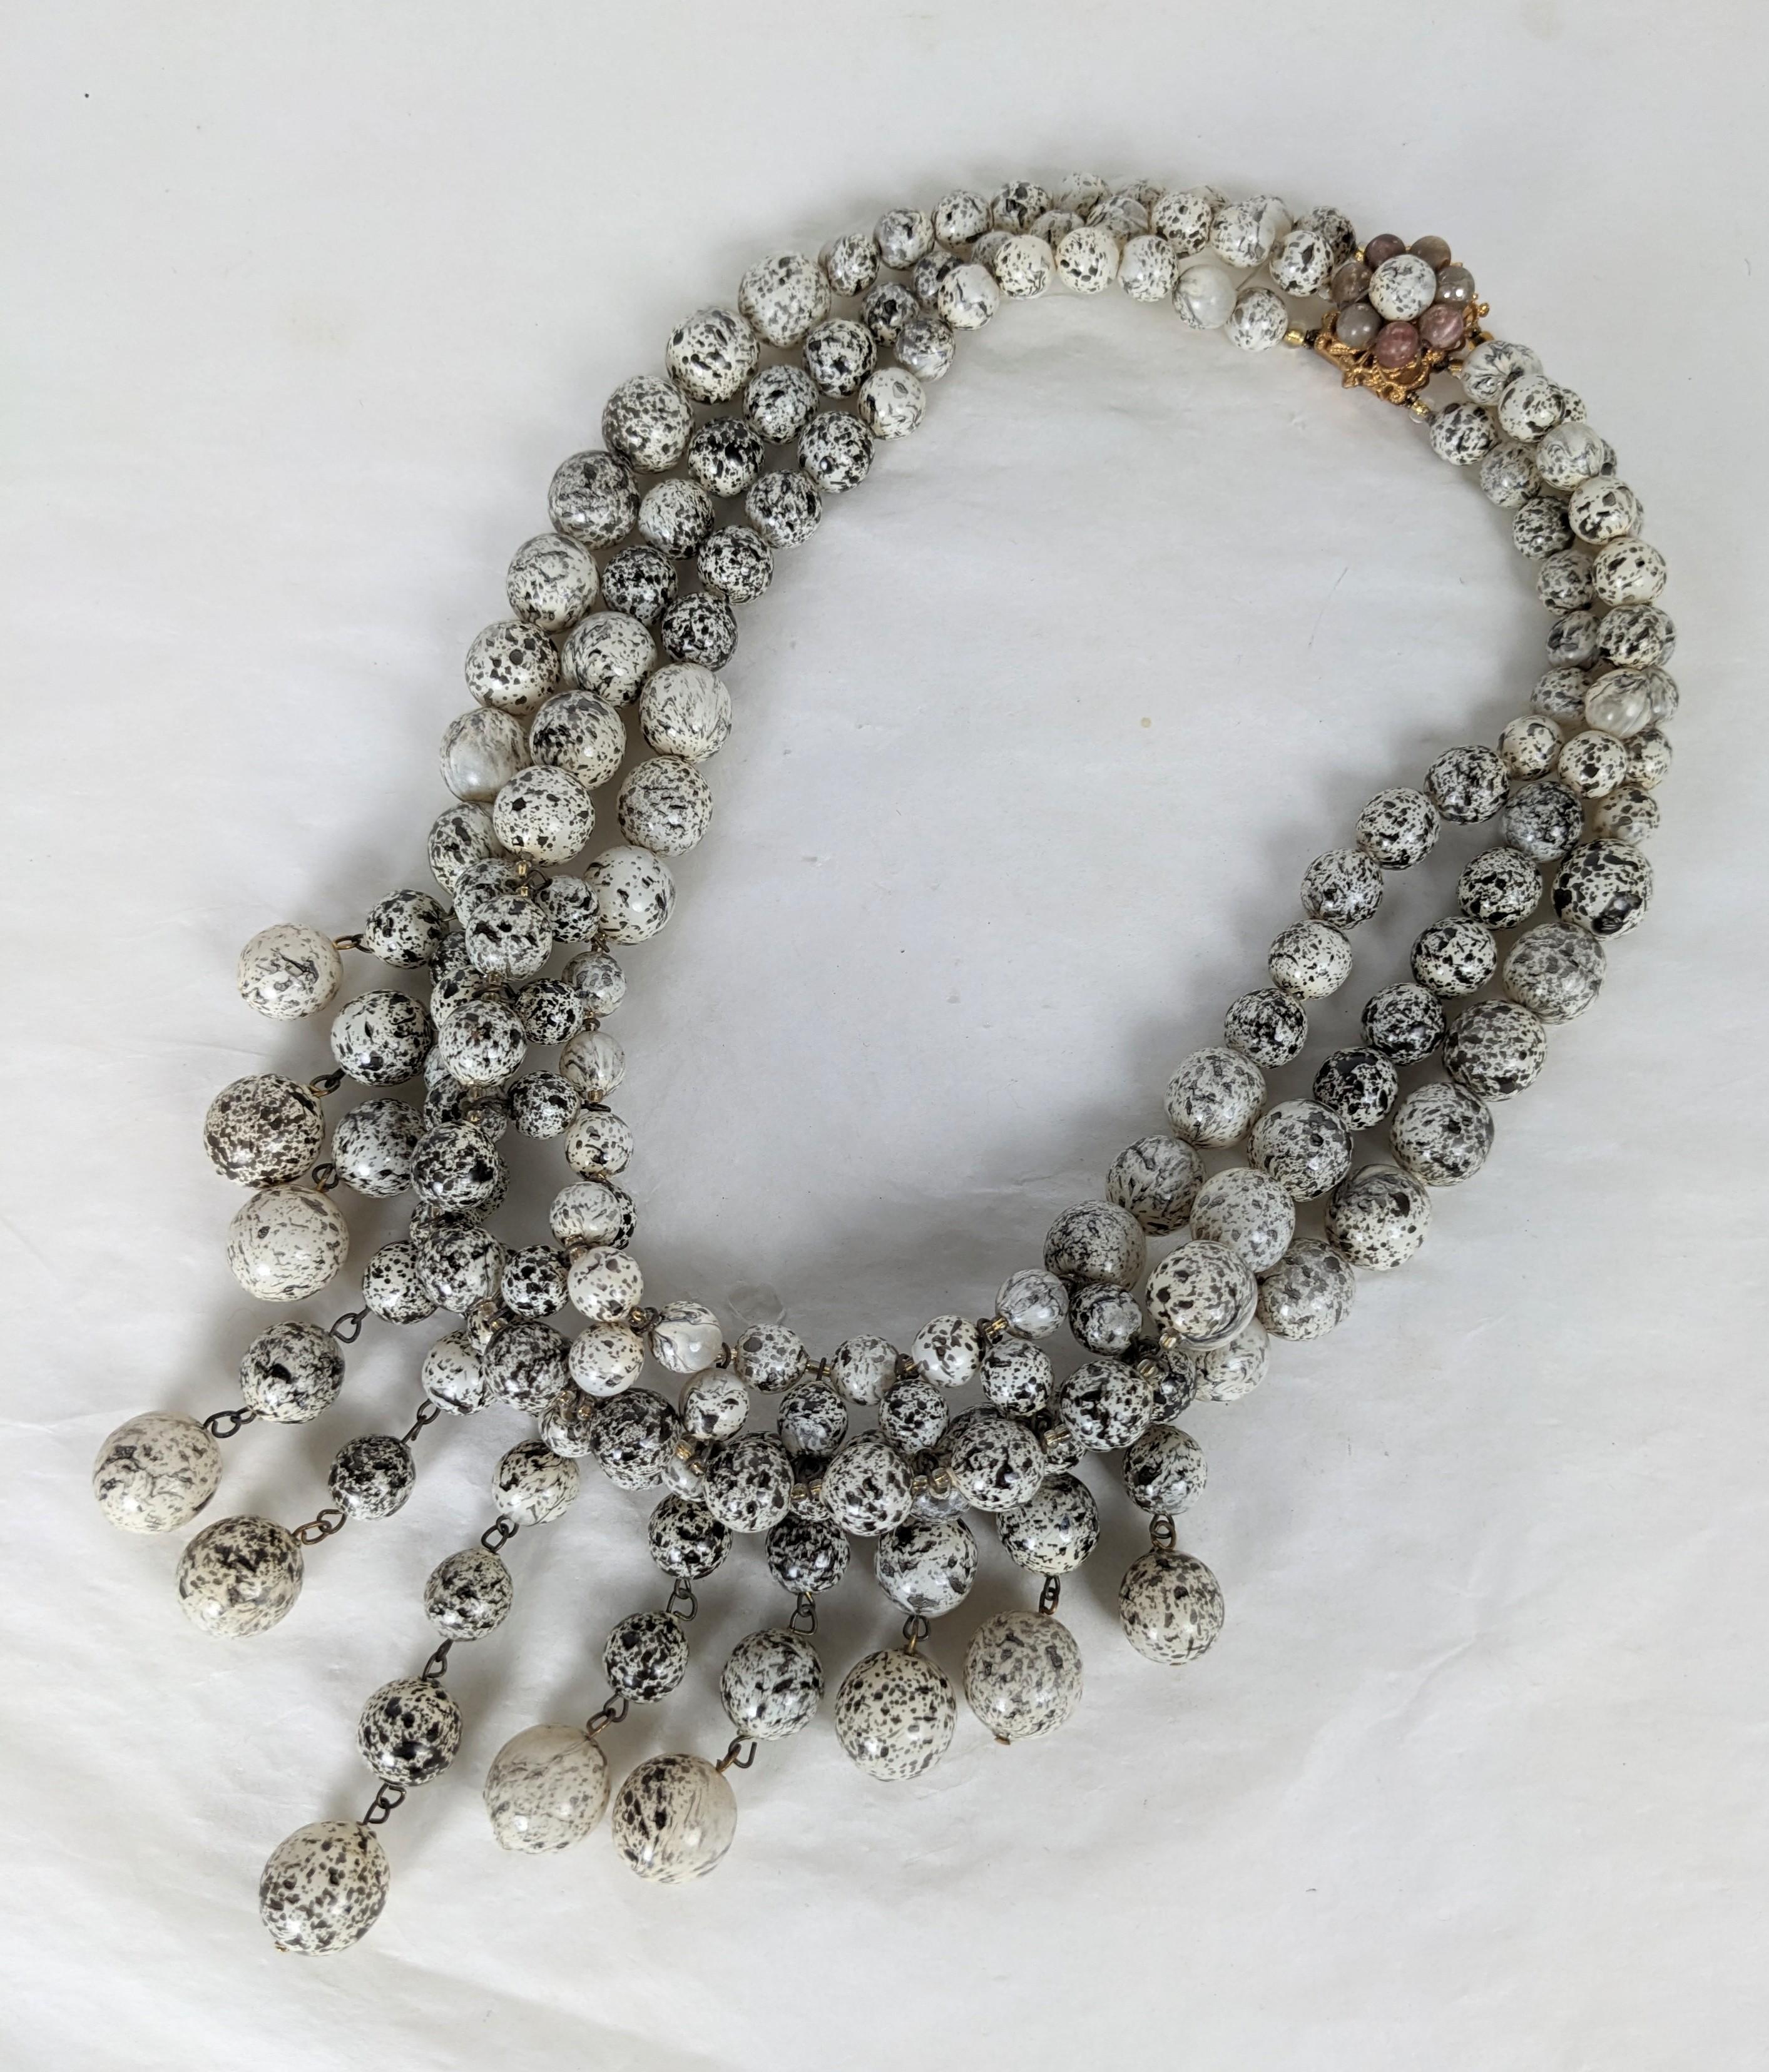 Unusual Louis Rousselet Pate de Verre Splatter Paint Bead Bib from the 1950's. Pate de verre hand made glass beads with black splatter pattern on ivory colored glass. Multiple strands with graduated drops with signature clasp. Unsigned. France